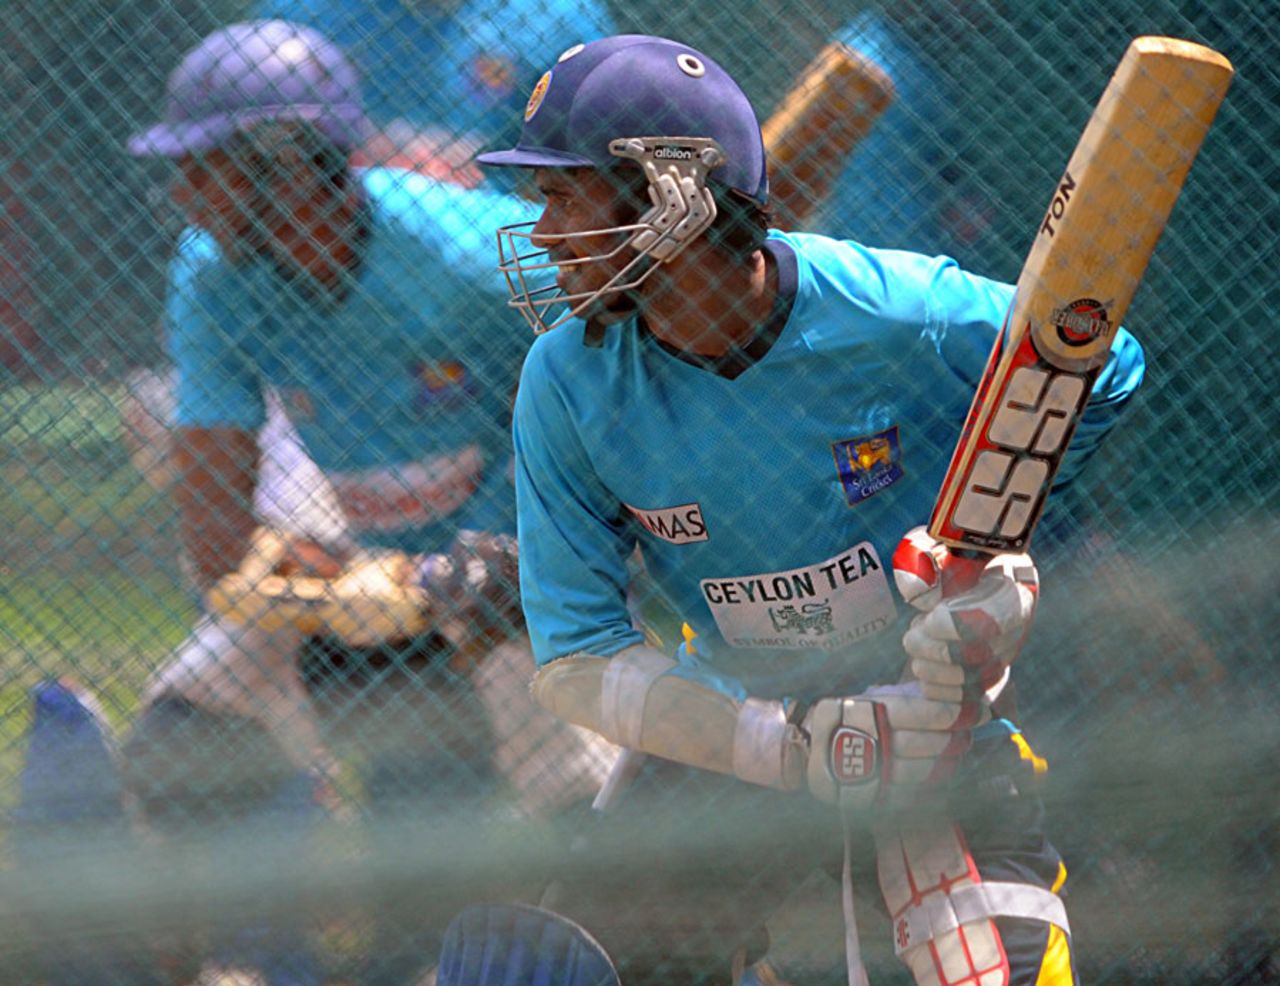 Upul Tharanga gets into position during a nets session, Colombo, July 18, 2013